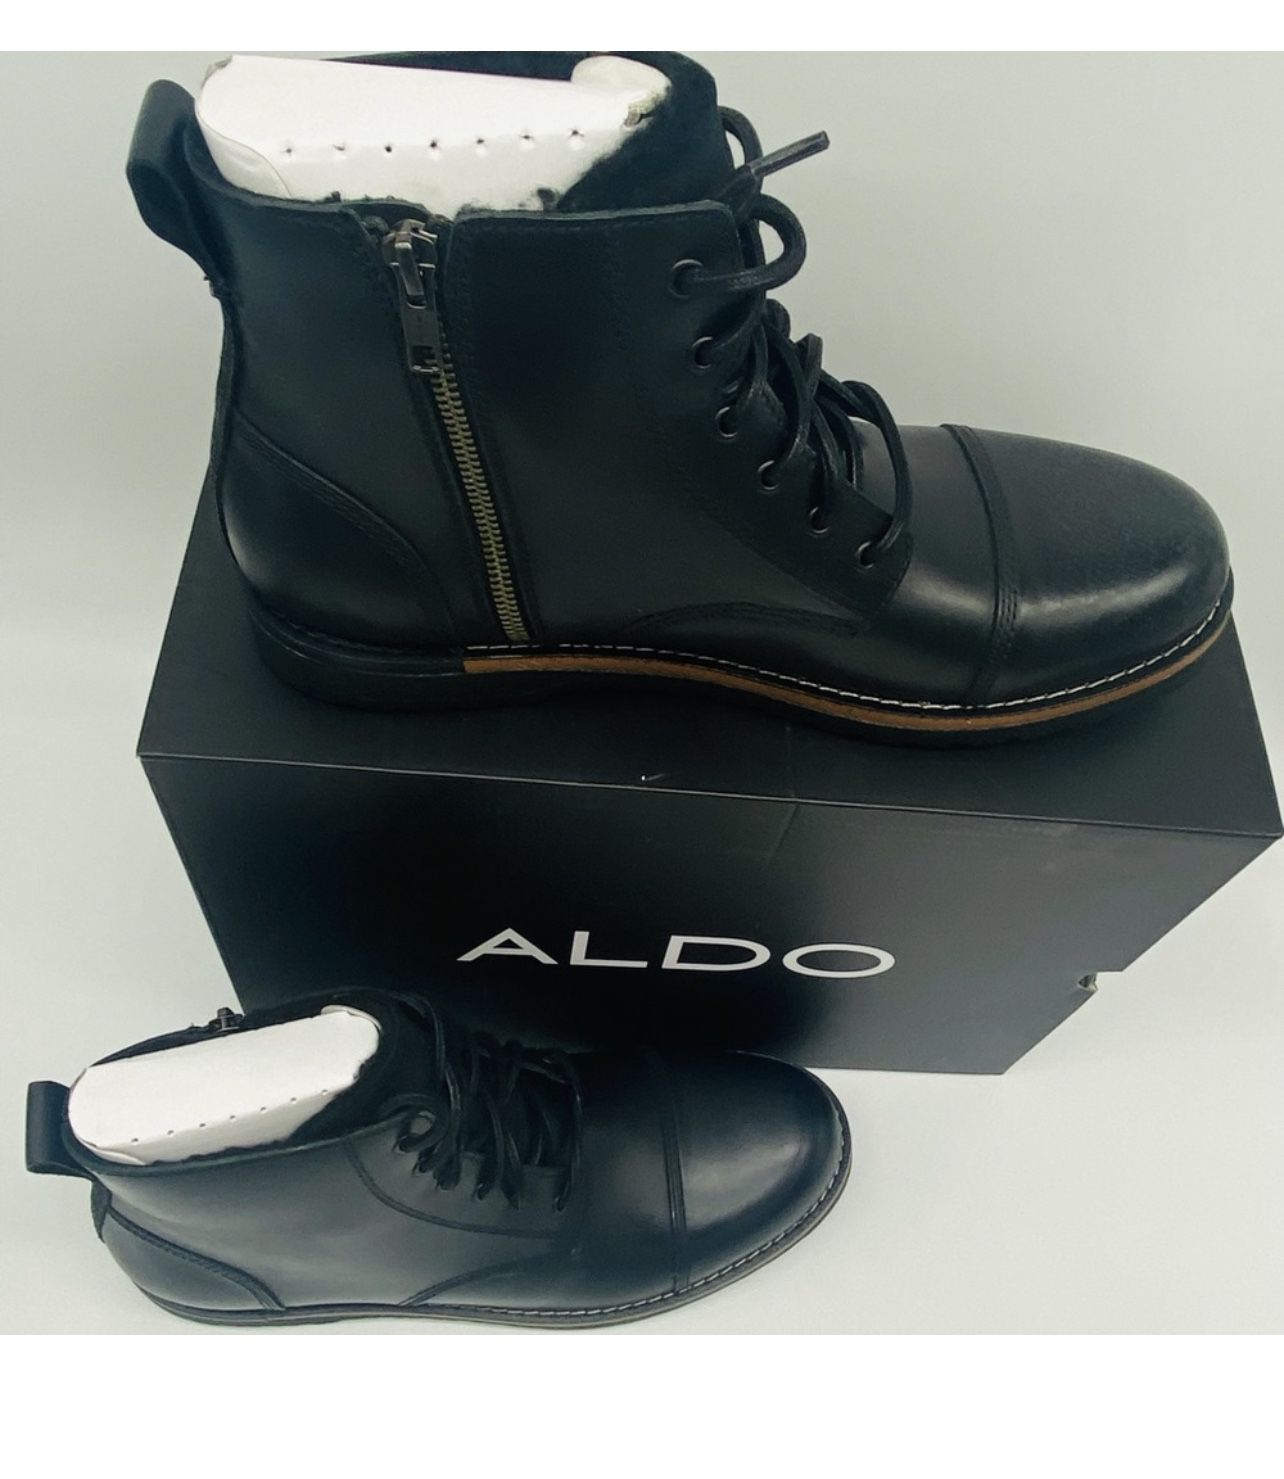 ALDO Erirenia _97 black boots - NWT | PICK UP ONLY